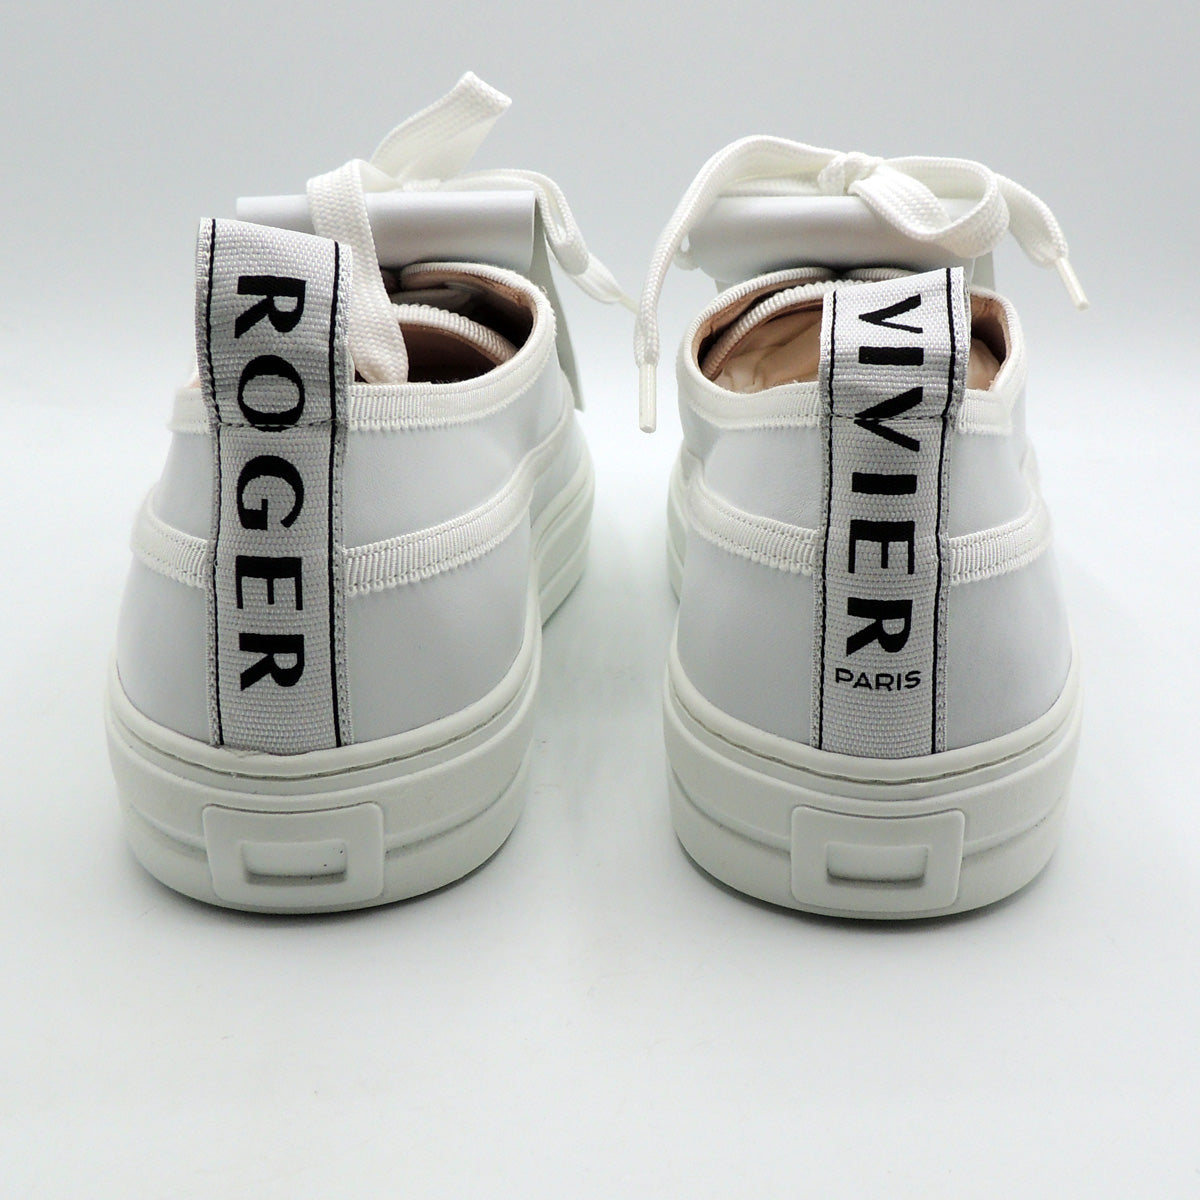 Roger Vivier Jewel Trainers in White UK 6